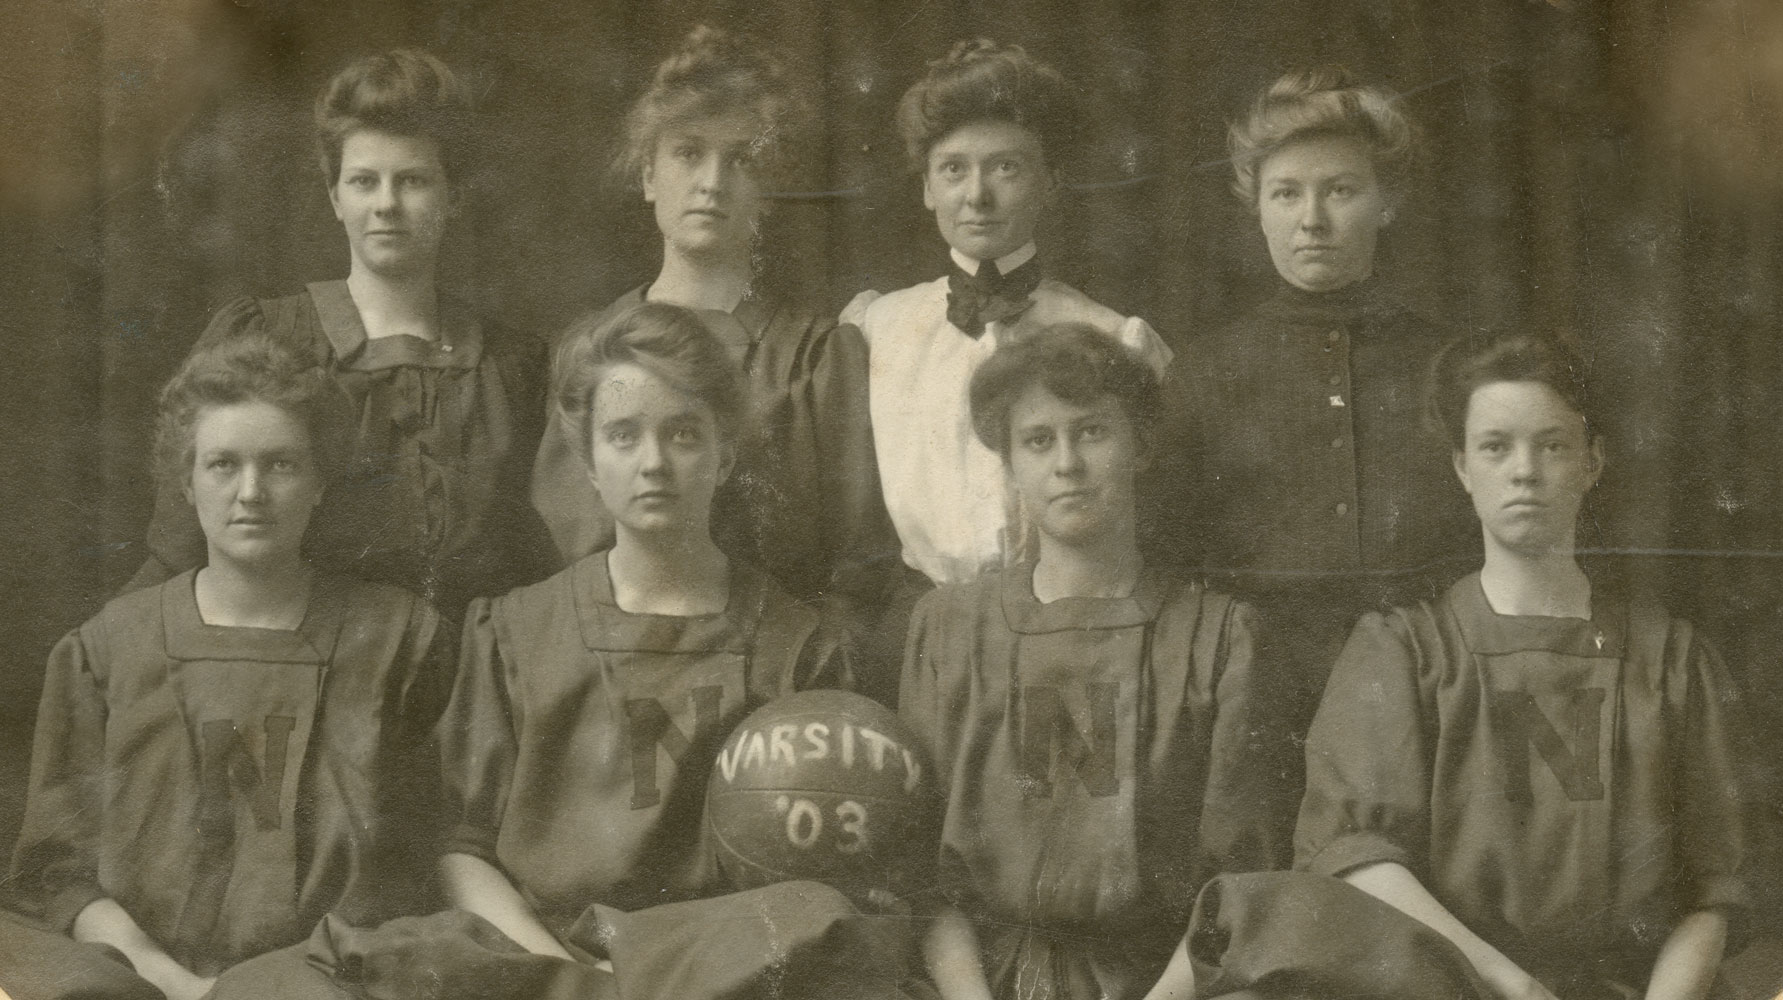 A black and white group portrait of women in dresses holding a basketball